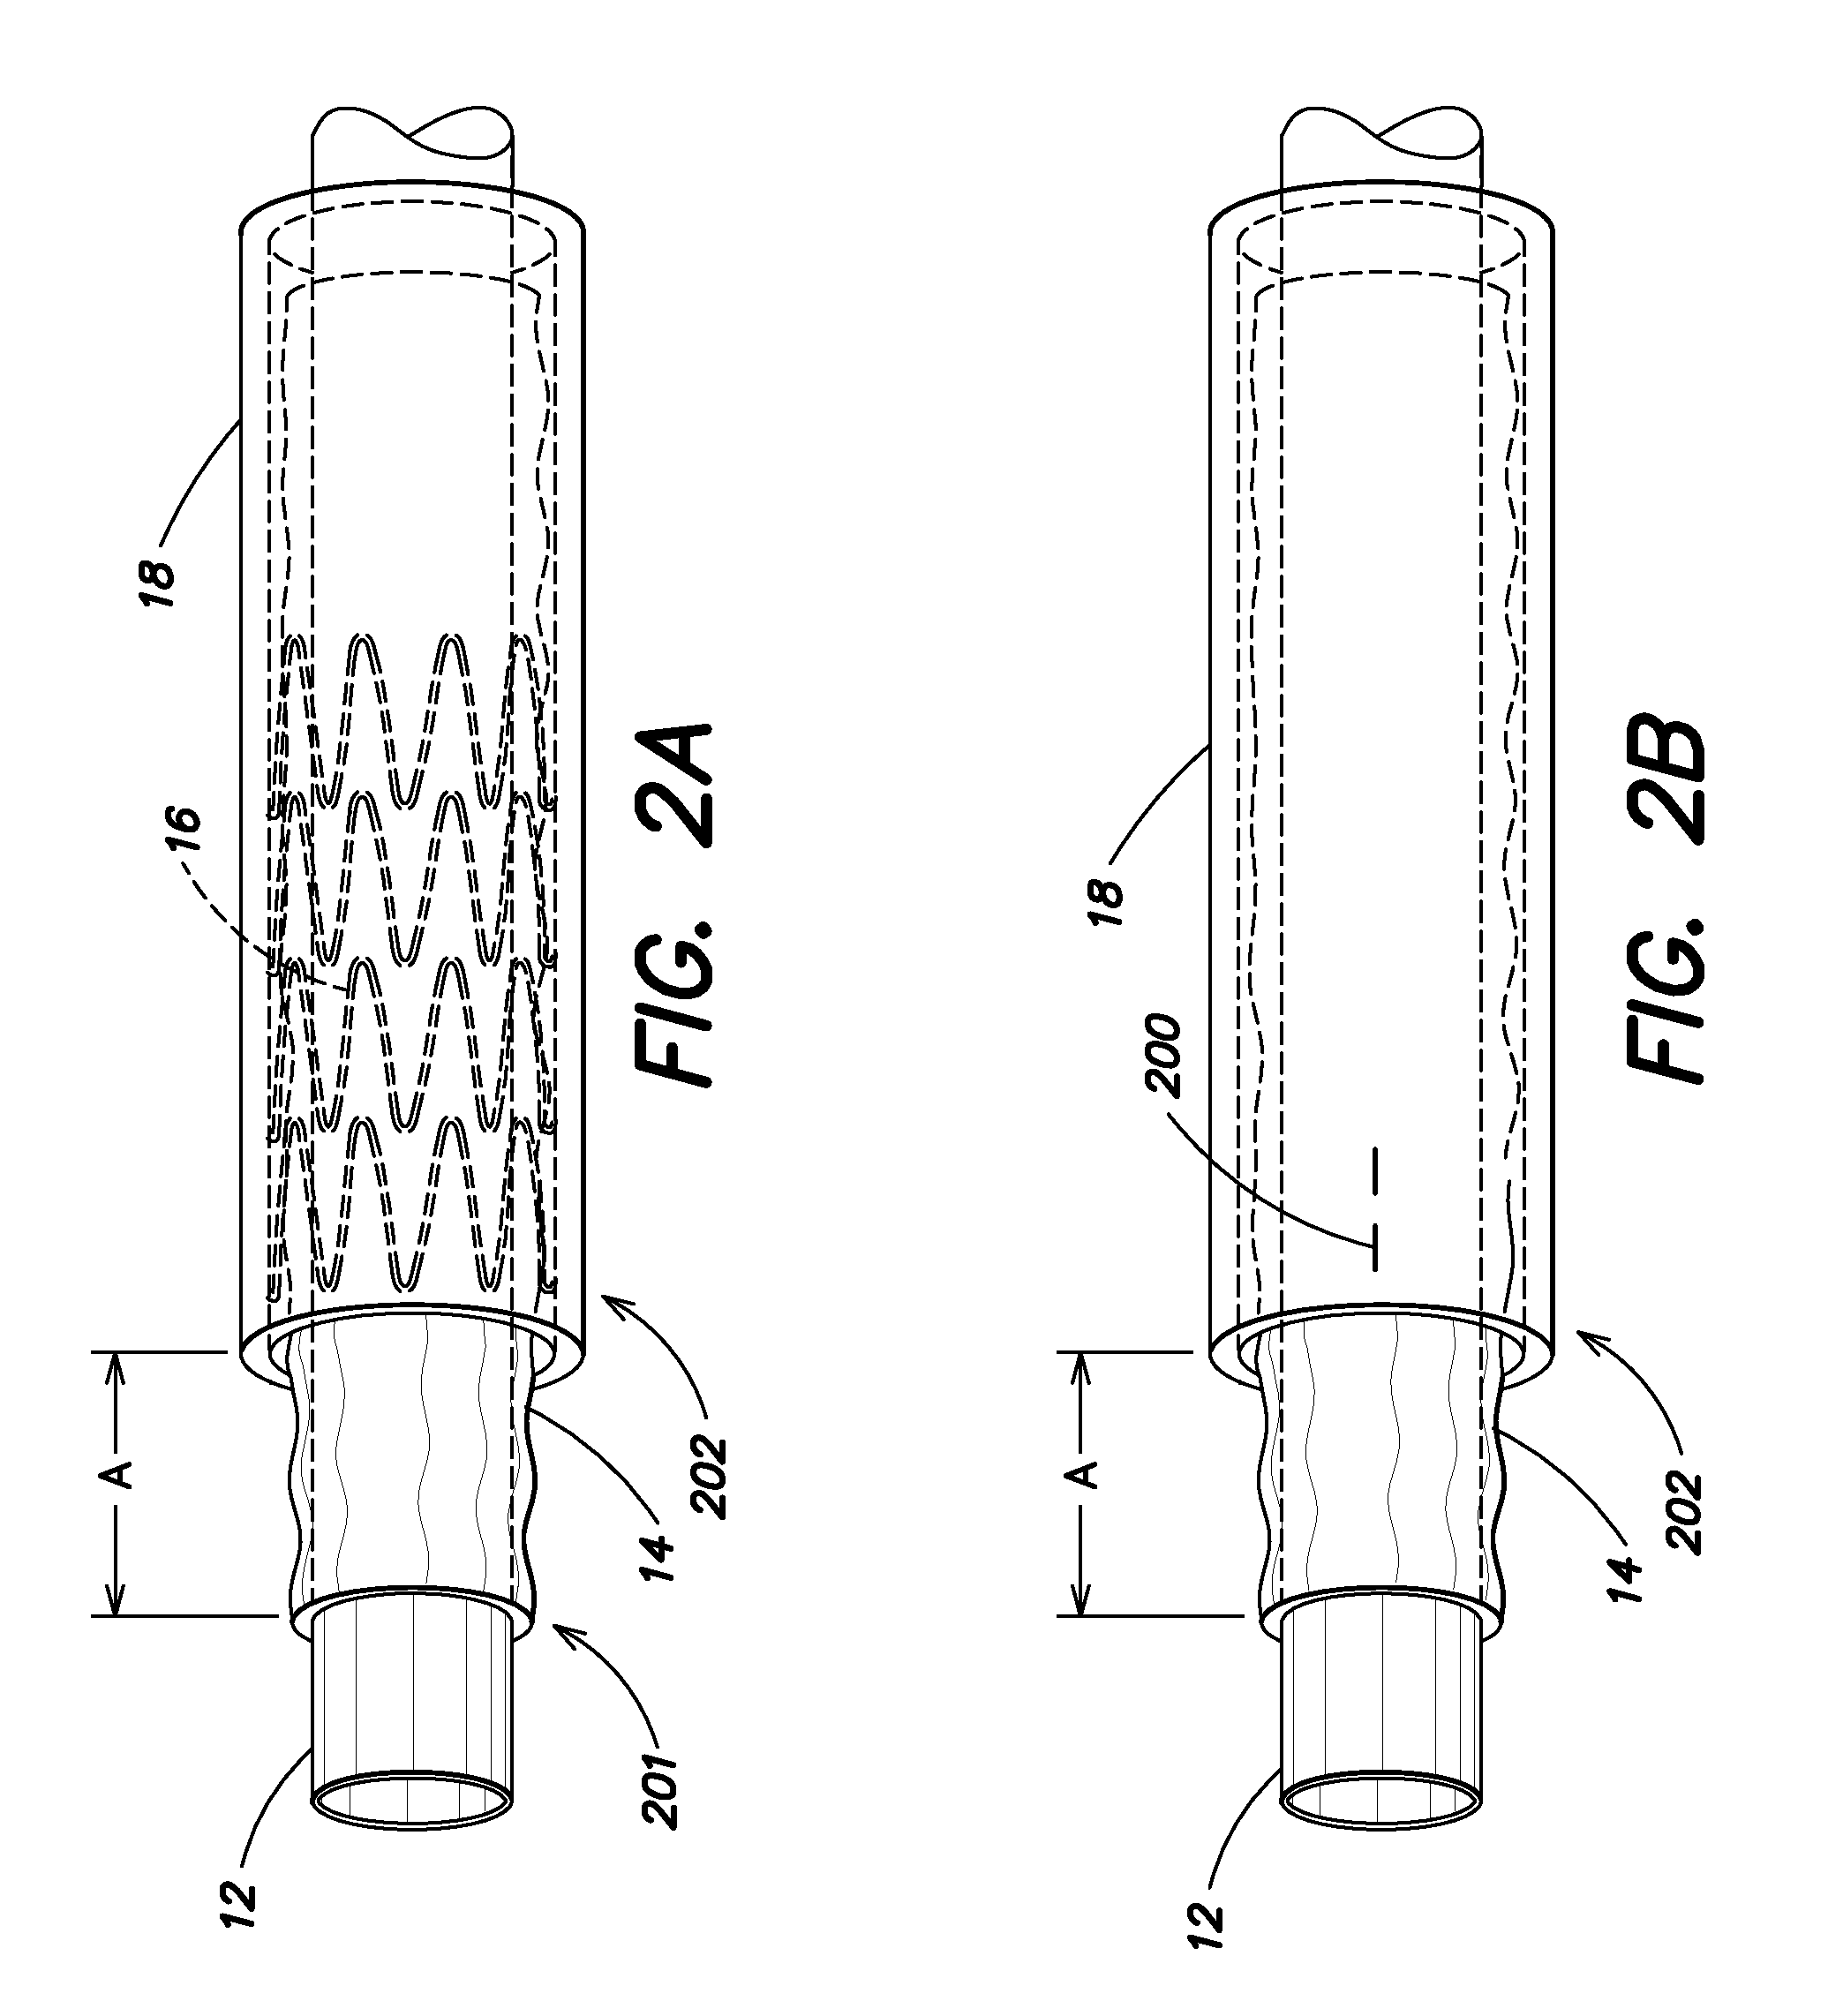 Device delivery system with balloon-relative sheath positioning